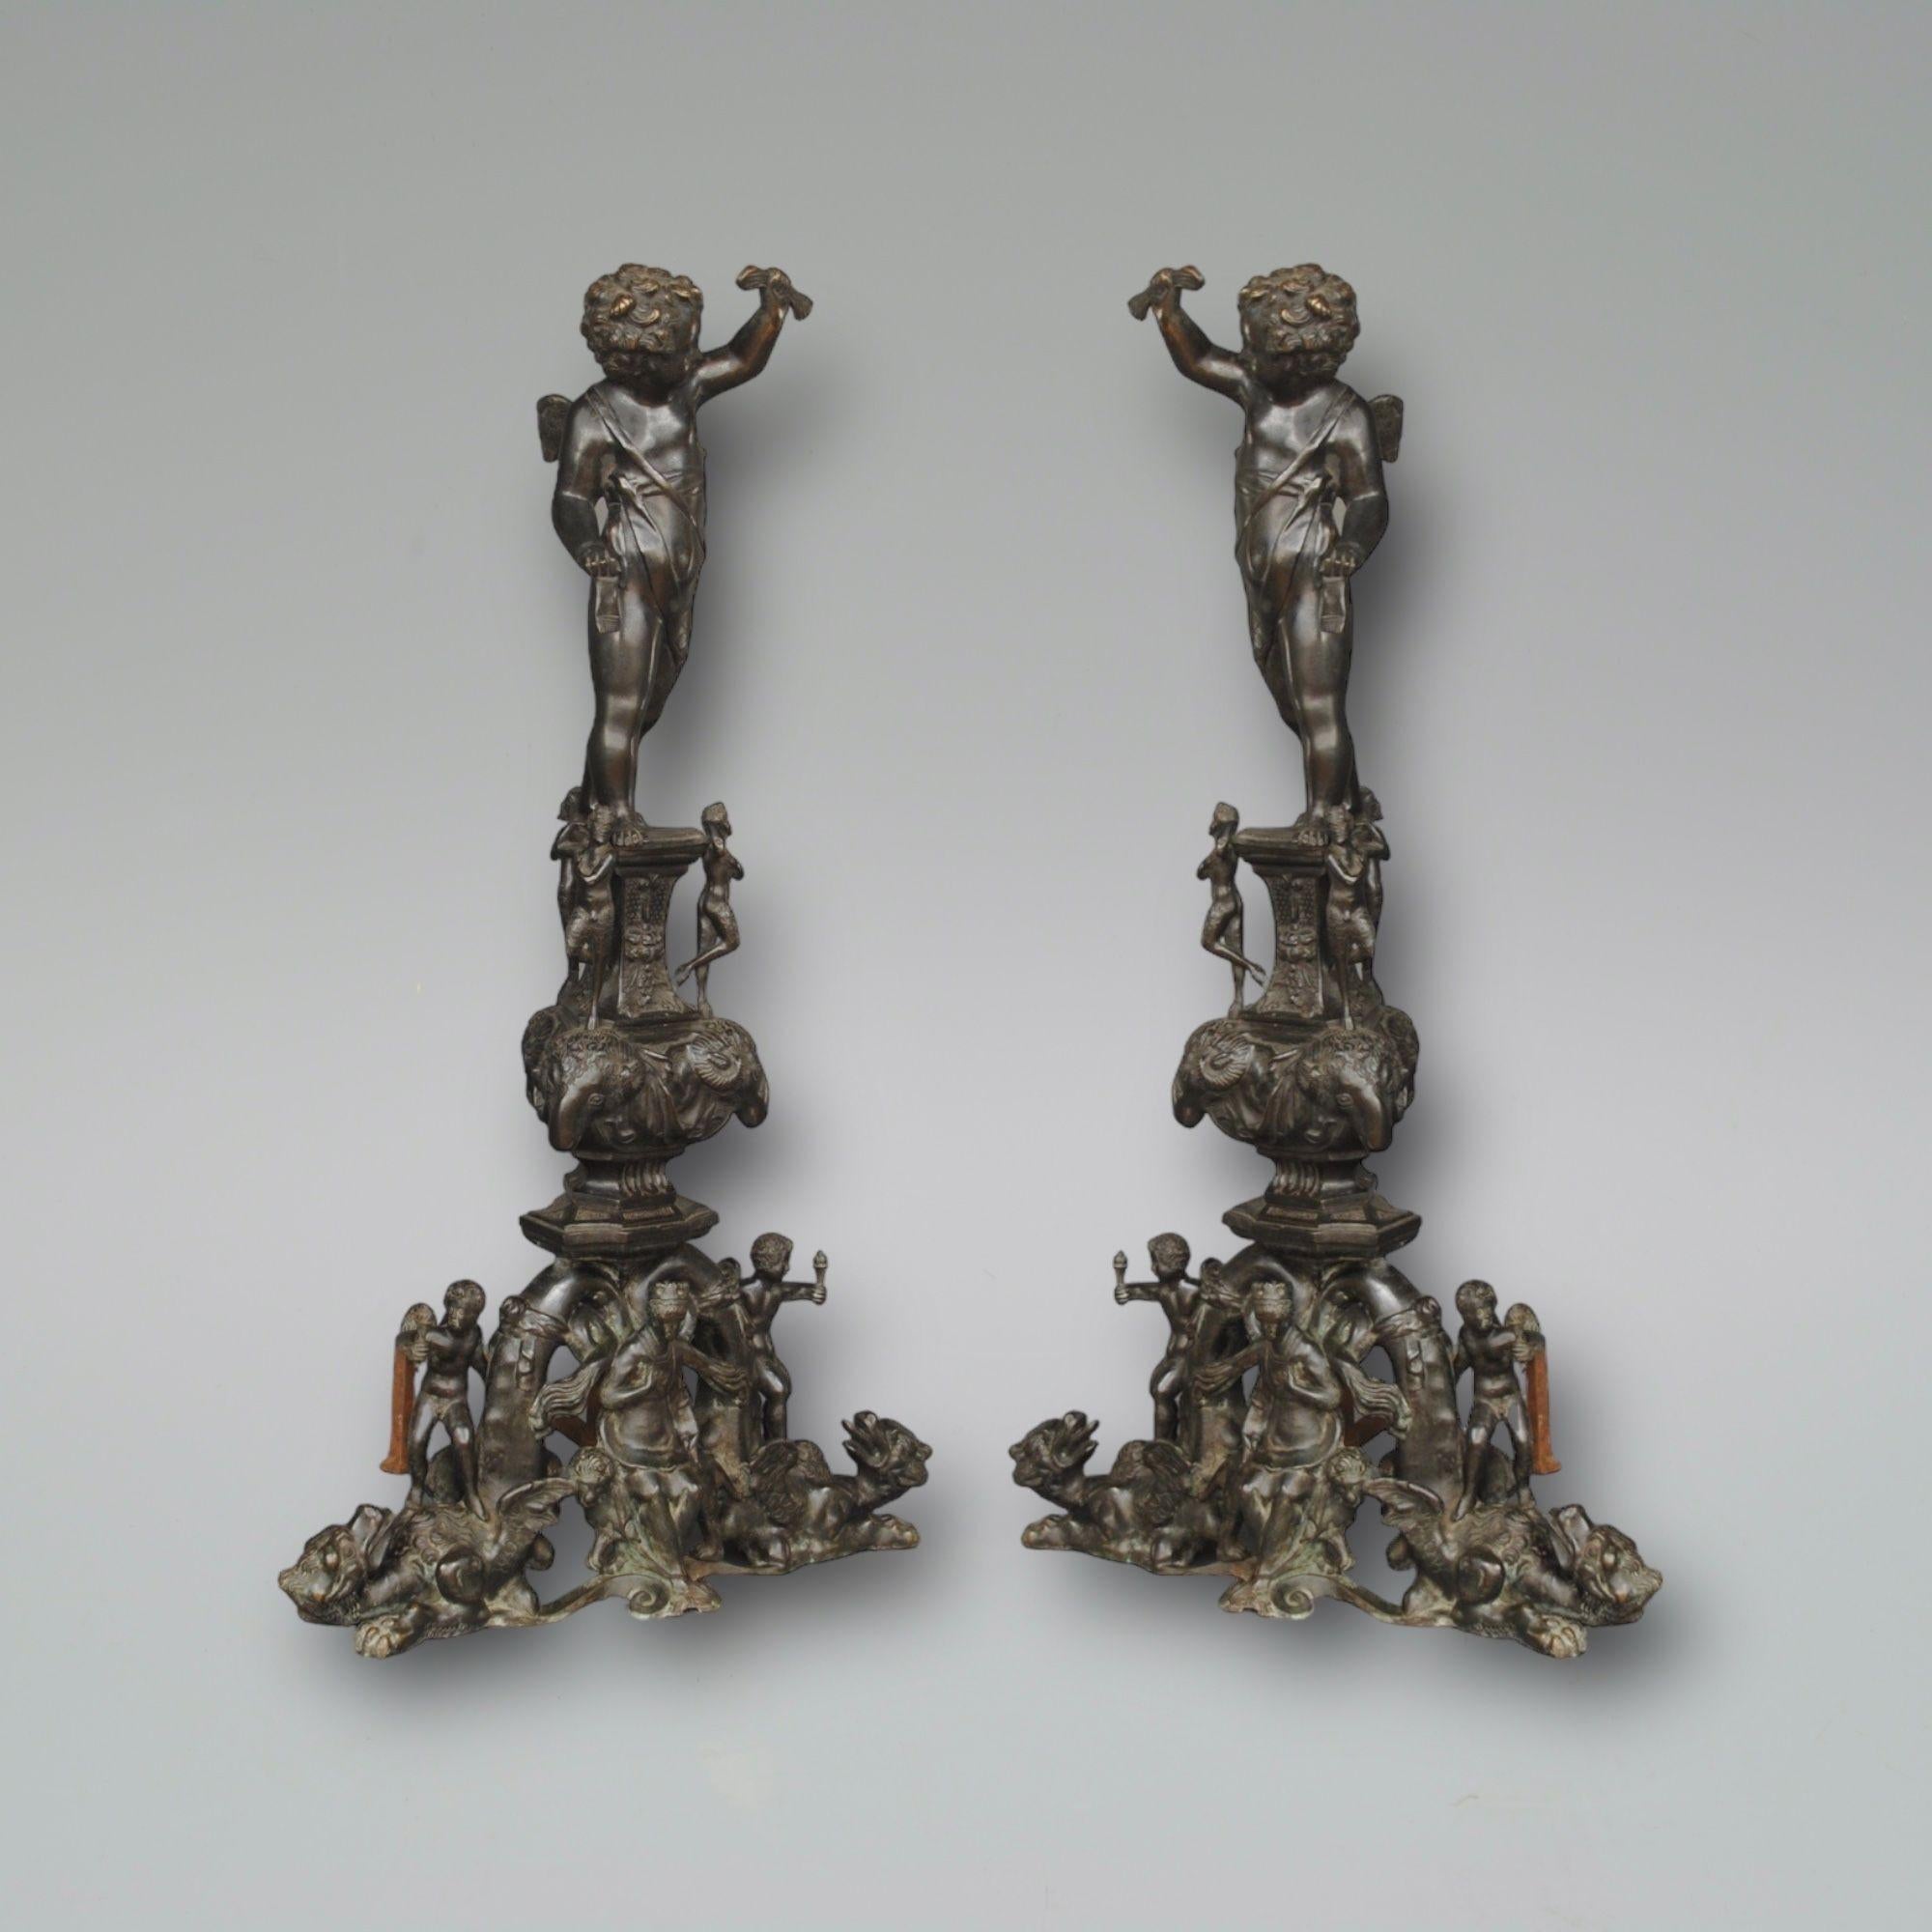 A large pair of 19th century renaissance style bronze andirons in the manner of Nicolo Roccatagla, mounted with cherubs and mystical figures.
These impressive andirons are after the designs of Roccatagla, many grace large country houses and this